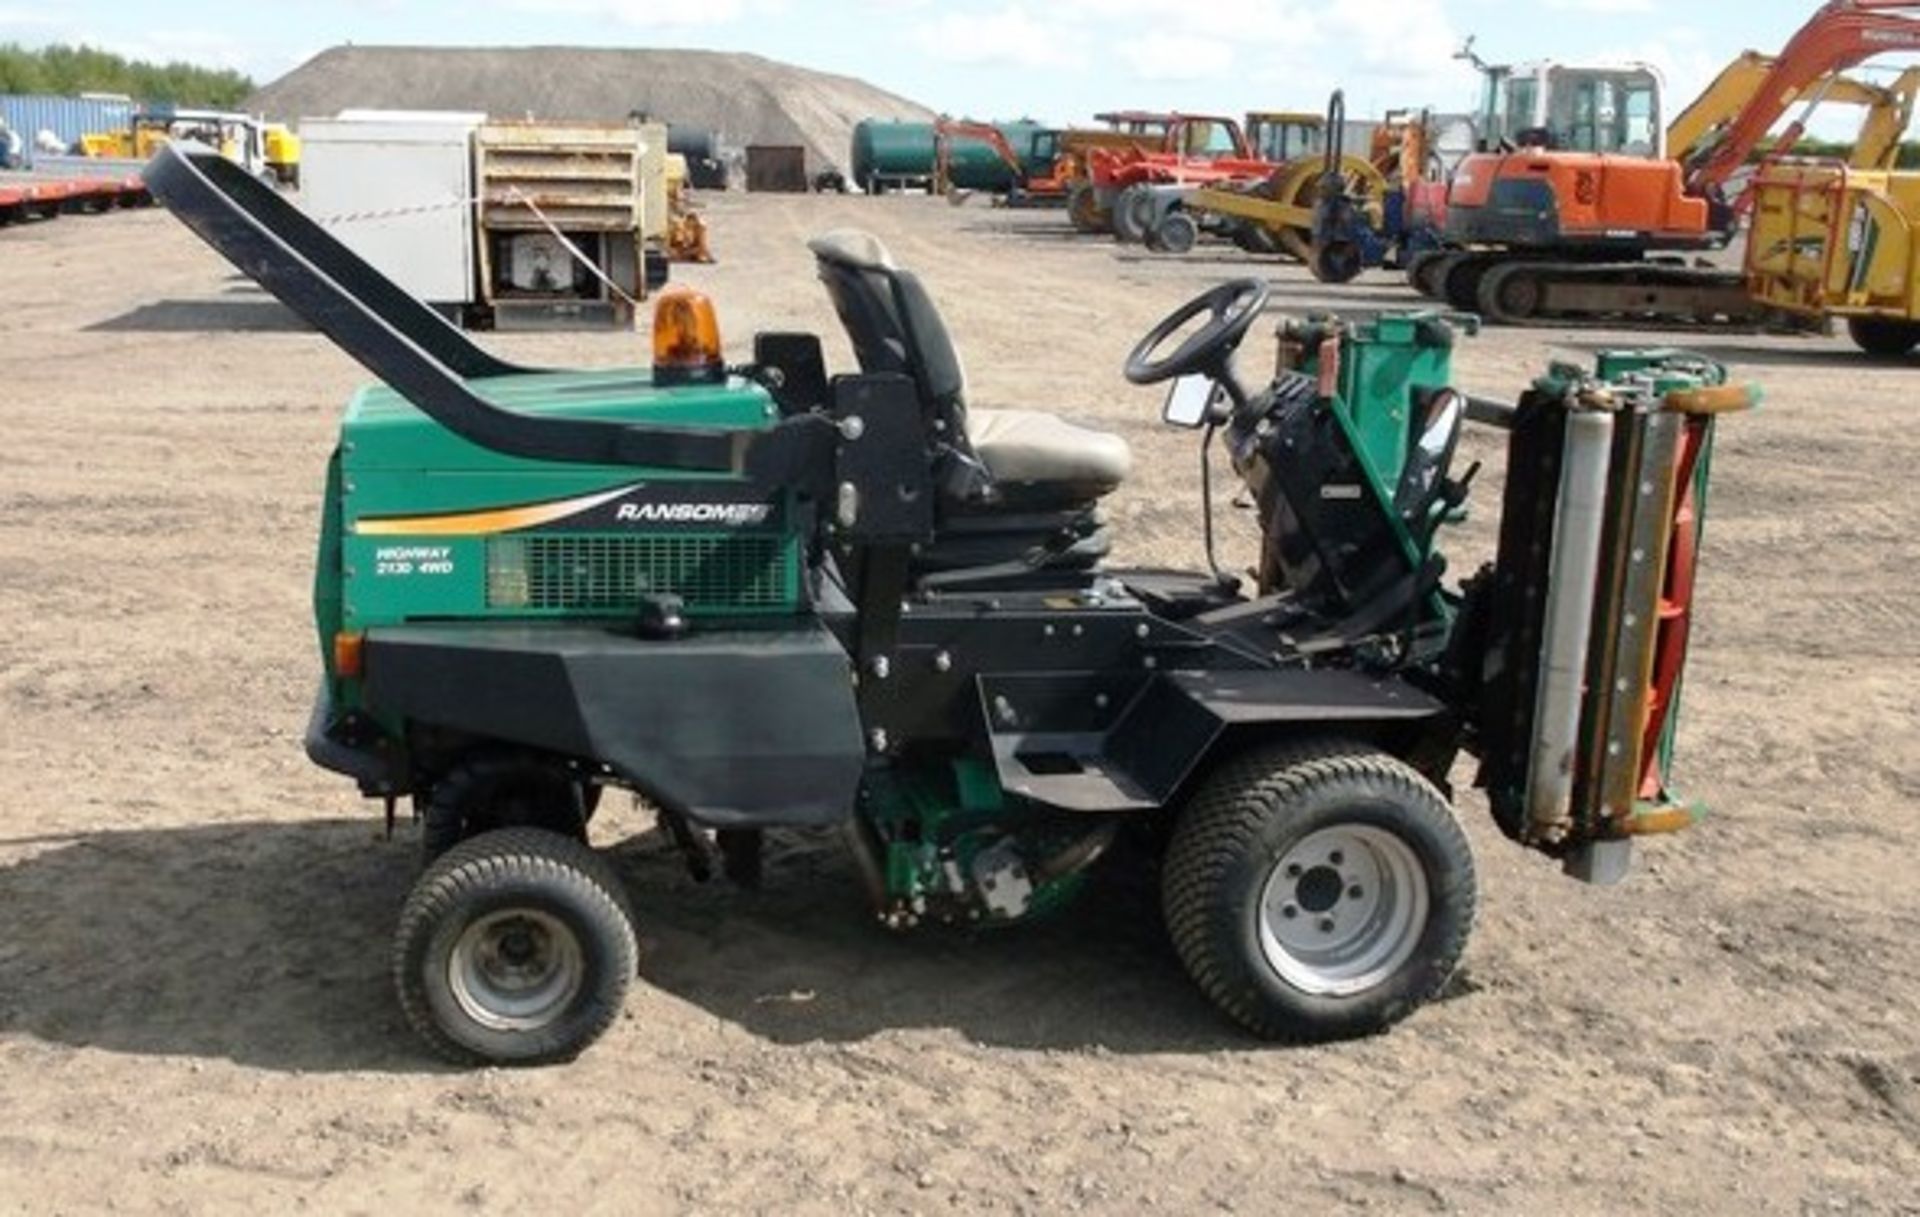 RANSOMES HIGHWAY 2130 MOWER, 5430 HOURS, SN CU000659, FT NO 3250 DOCUMENTS IN OFFICE - Image 3 of 6